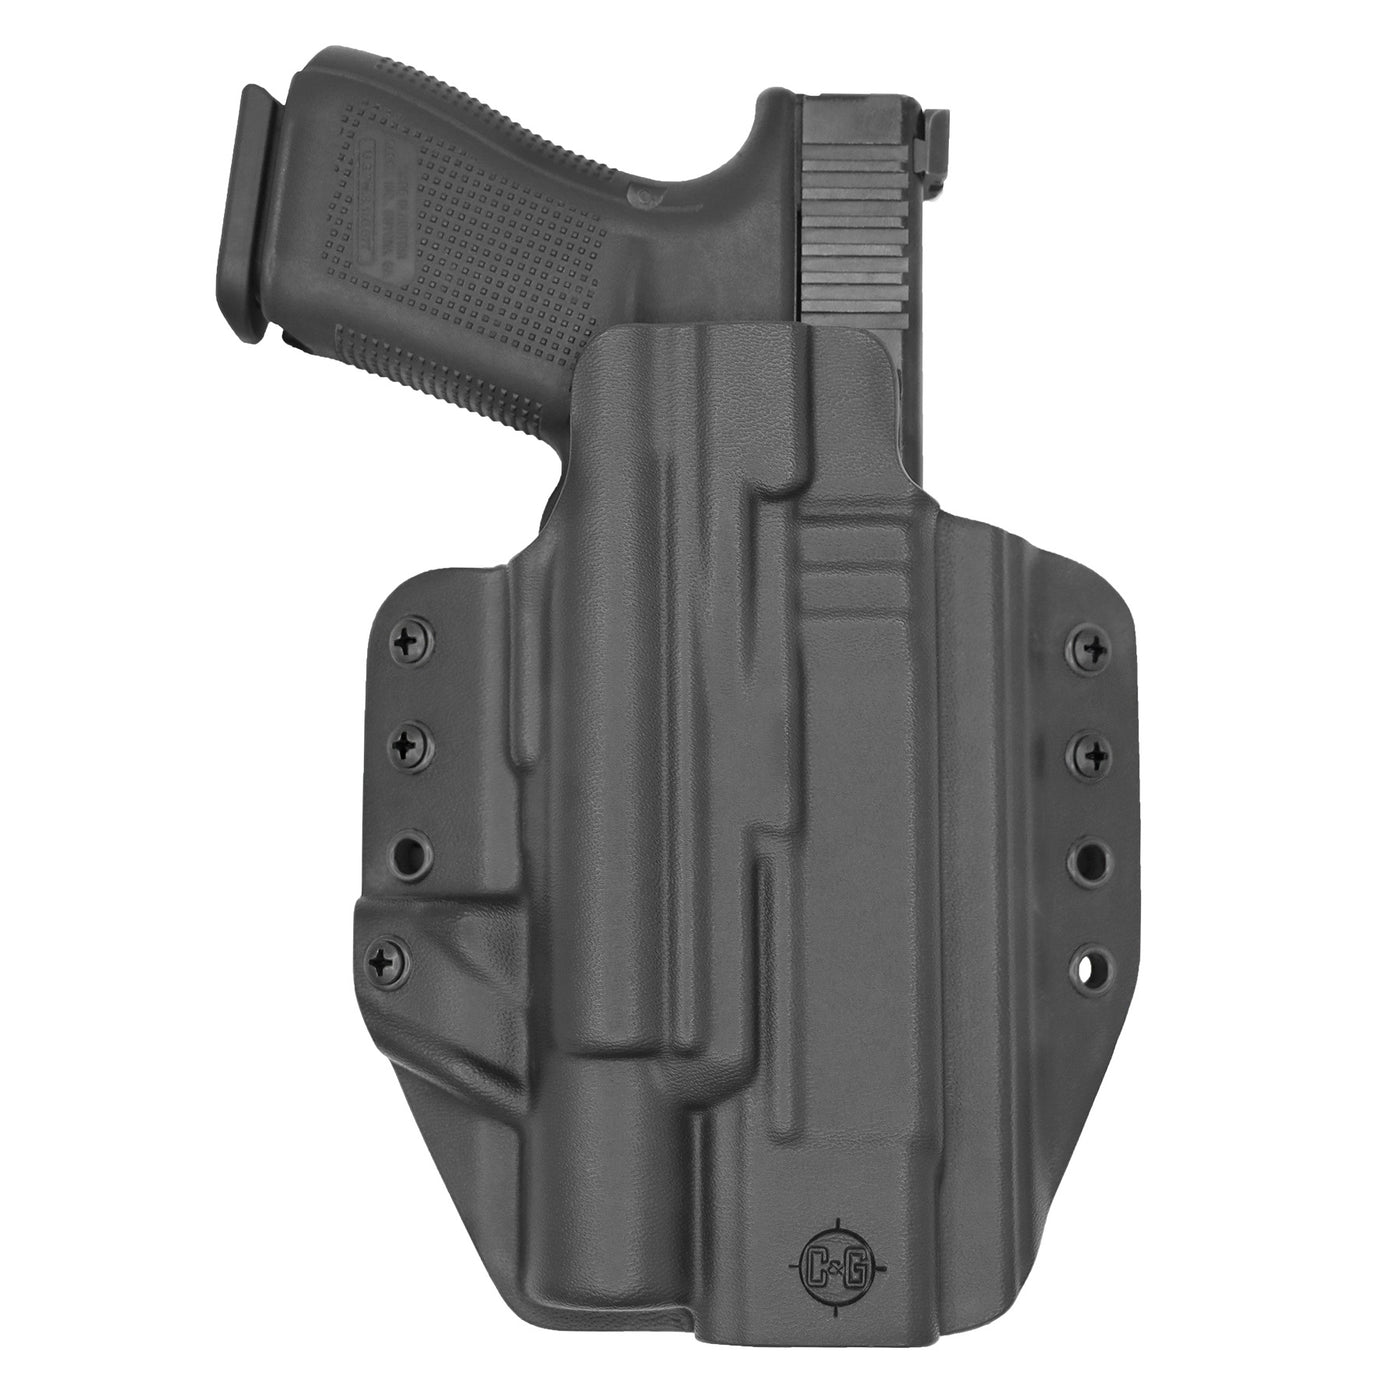 C&G Holsters Quickship OWB Tactical Glock X300 in holstered position